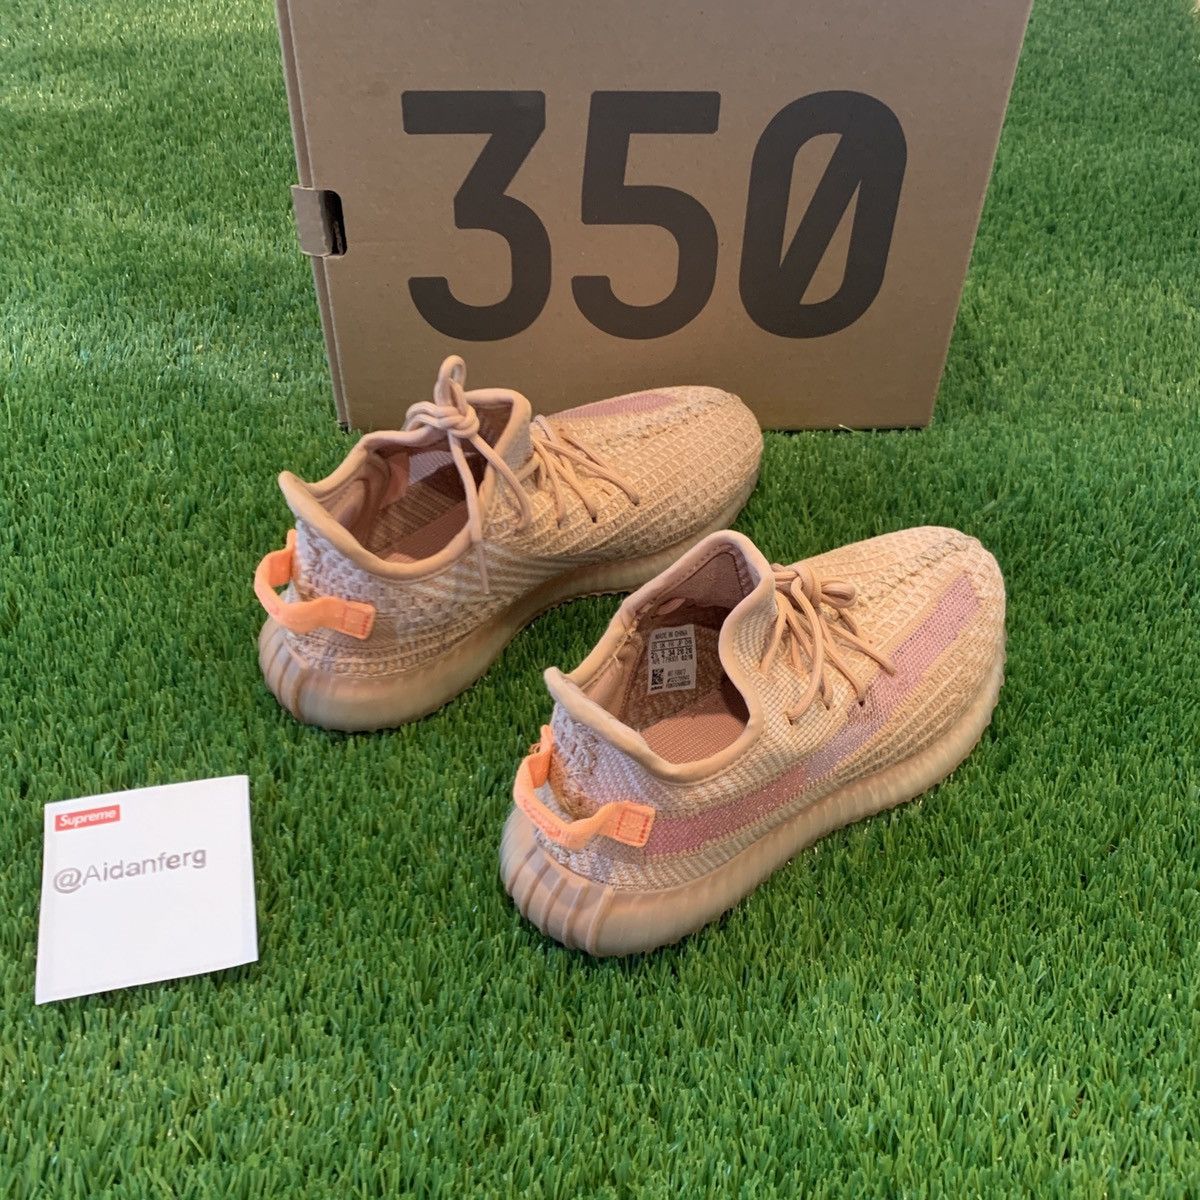 Adidas Kids Size 2.5 Yeezy Boost 350 V2 Clay(read description) Size US 5 / EU 37 - 2 Preview